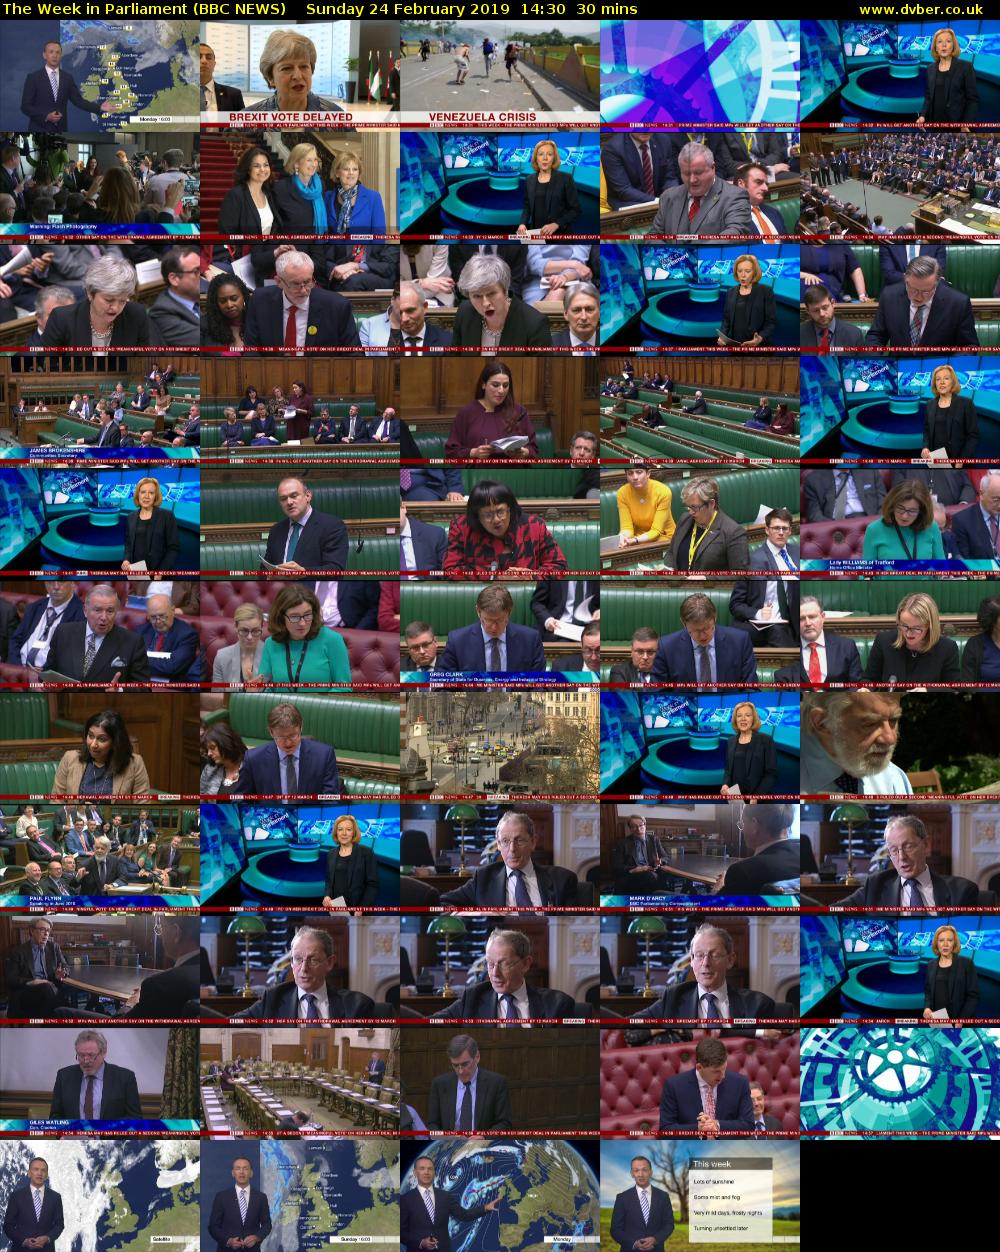 The Week in Parliament (BBC NEWS) Sunday 24 February 2019 14:30 - 15:00